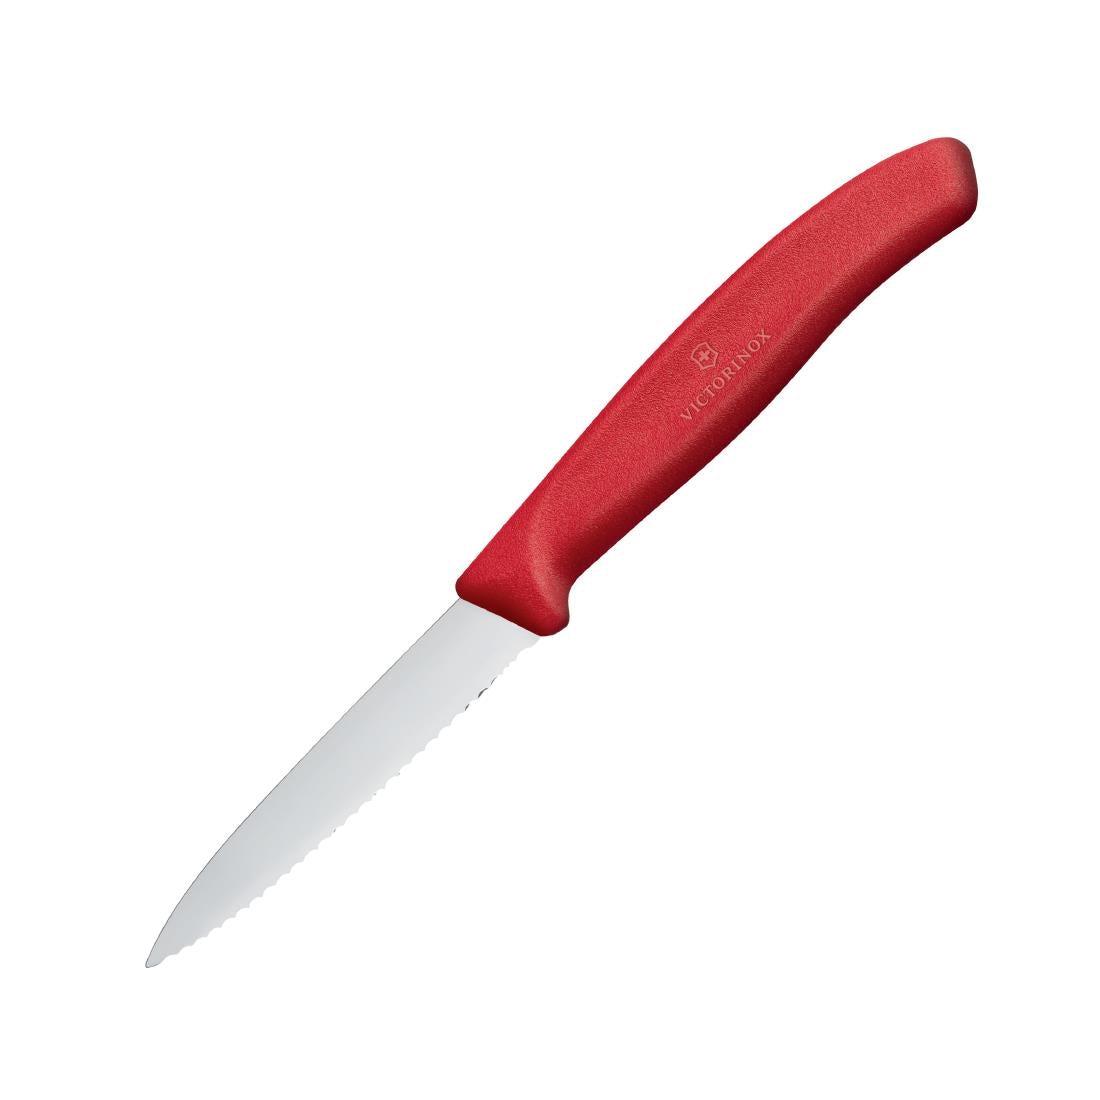 CX749 Victorinox Paring Knife Pointed Tip Serrated Edge 8cm Red JD Catering Equipment Solutions Ltd